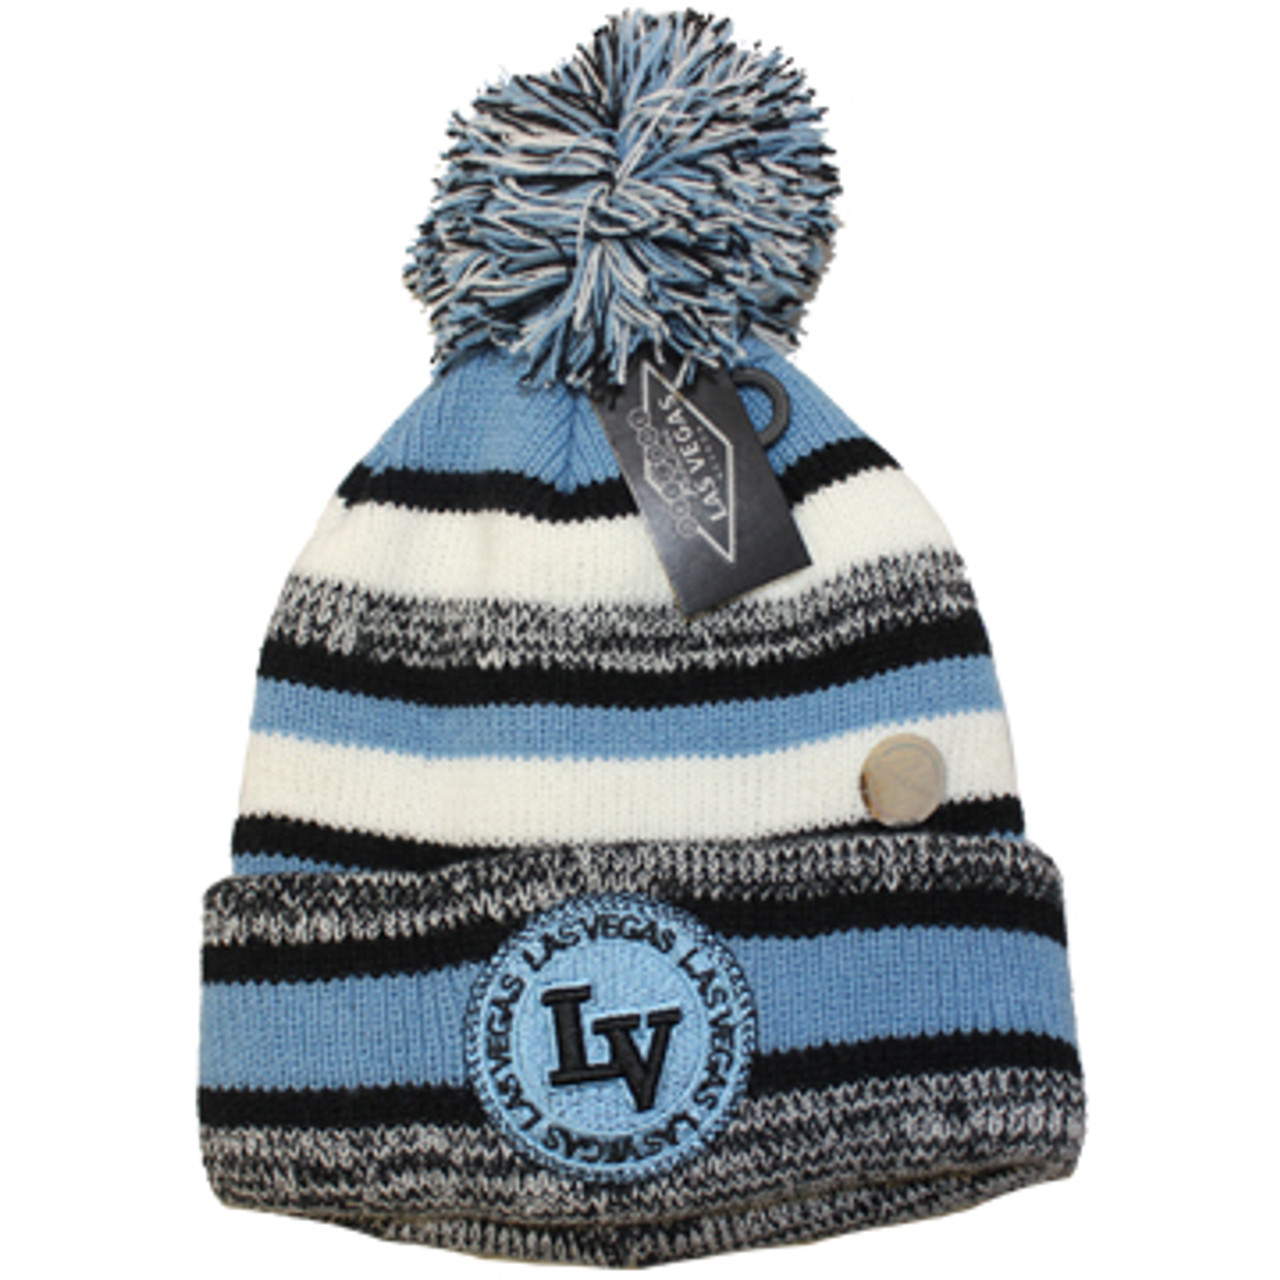 CHILD sized Toboggan from Las Vegas with blue and puff